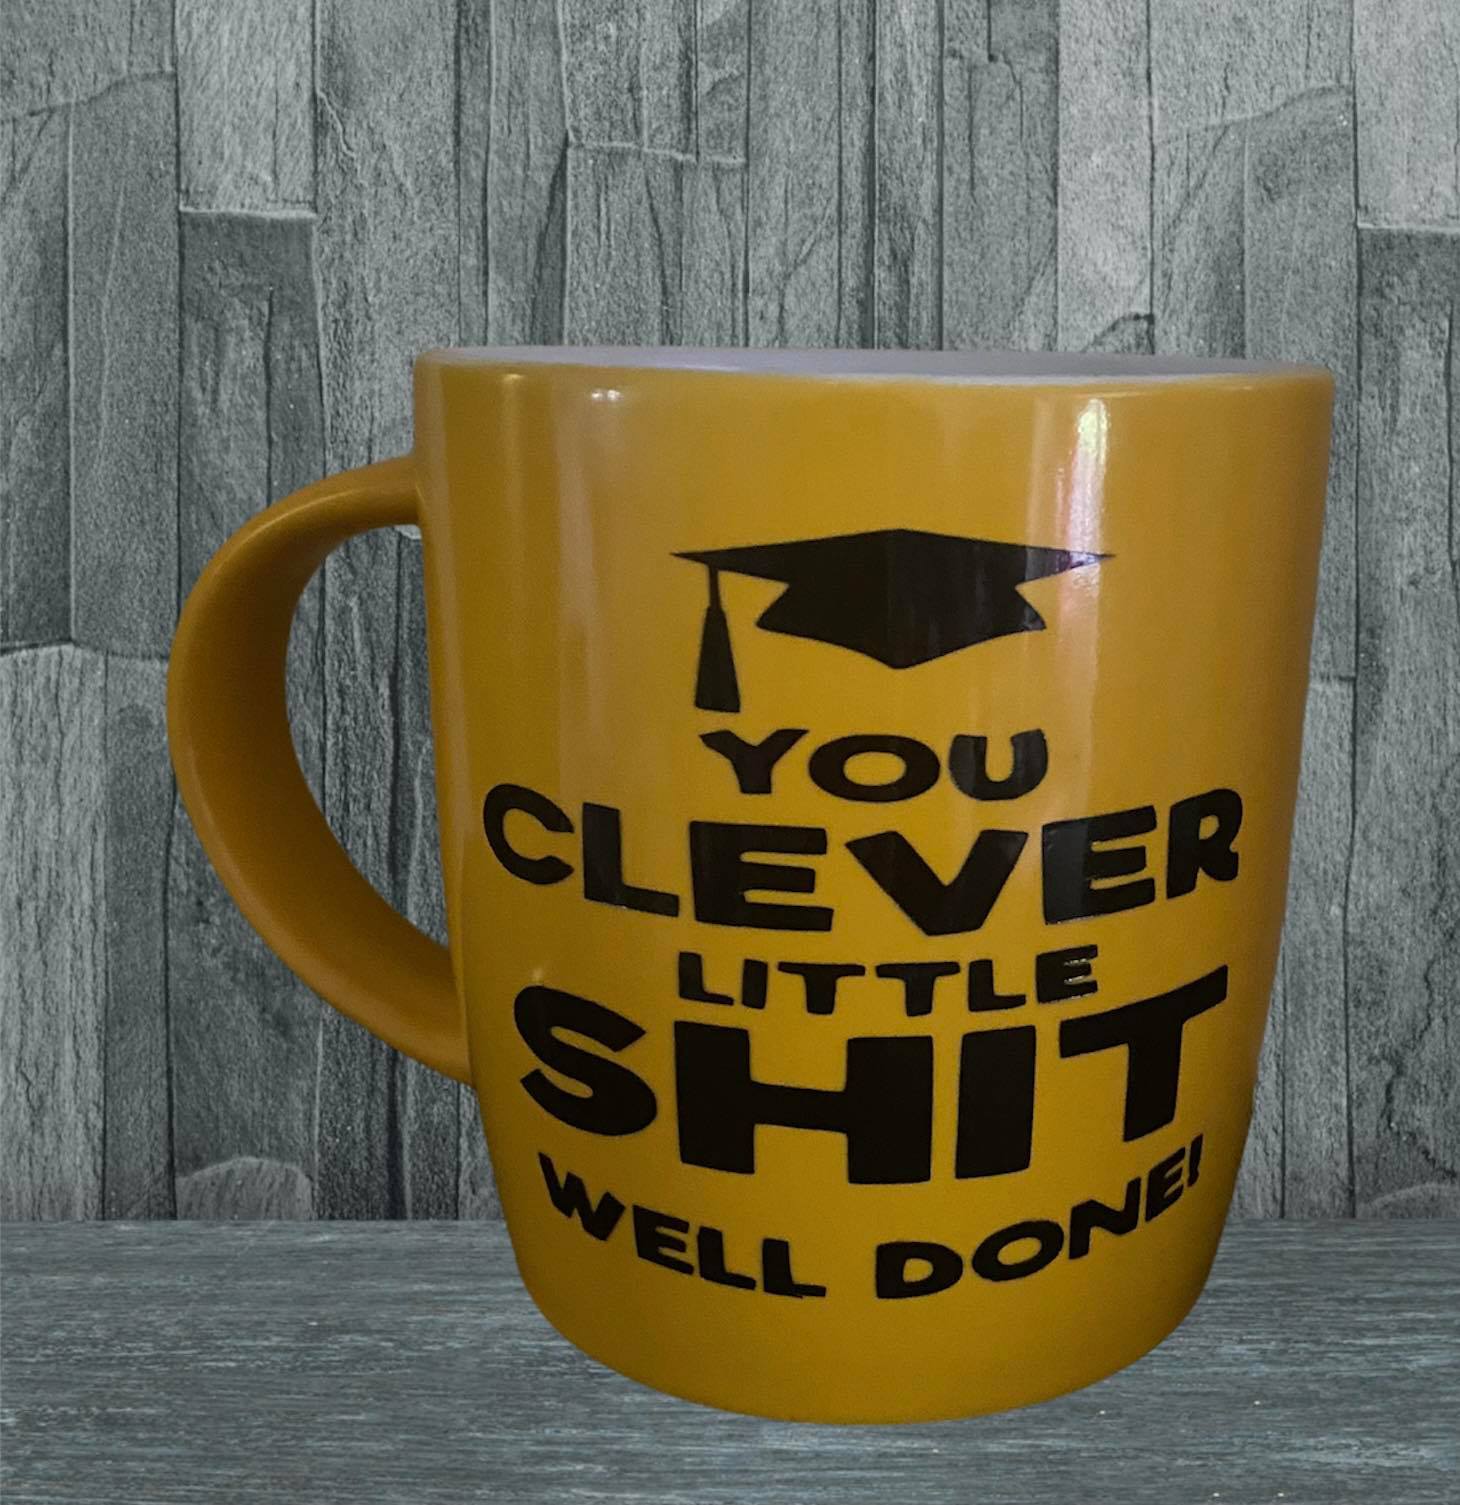 "You Clever Little Shit Well Done!" Mug